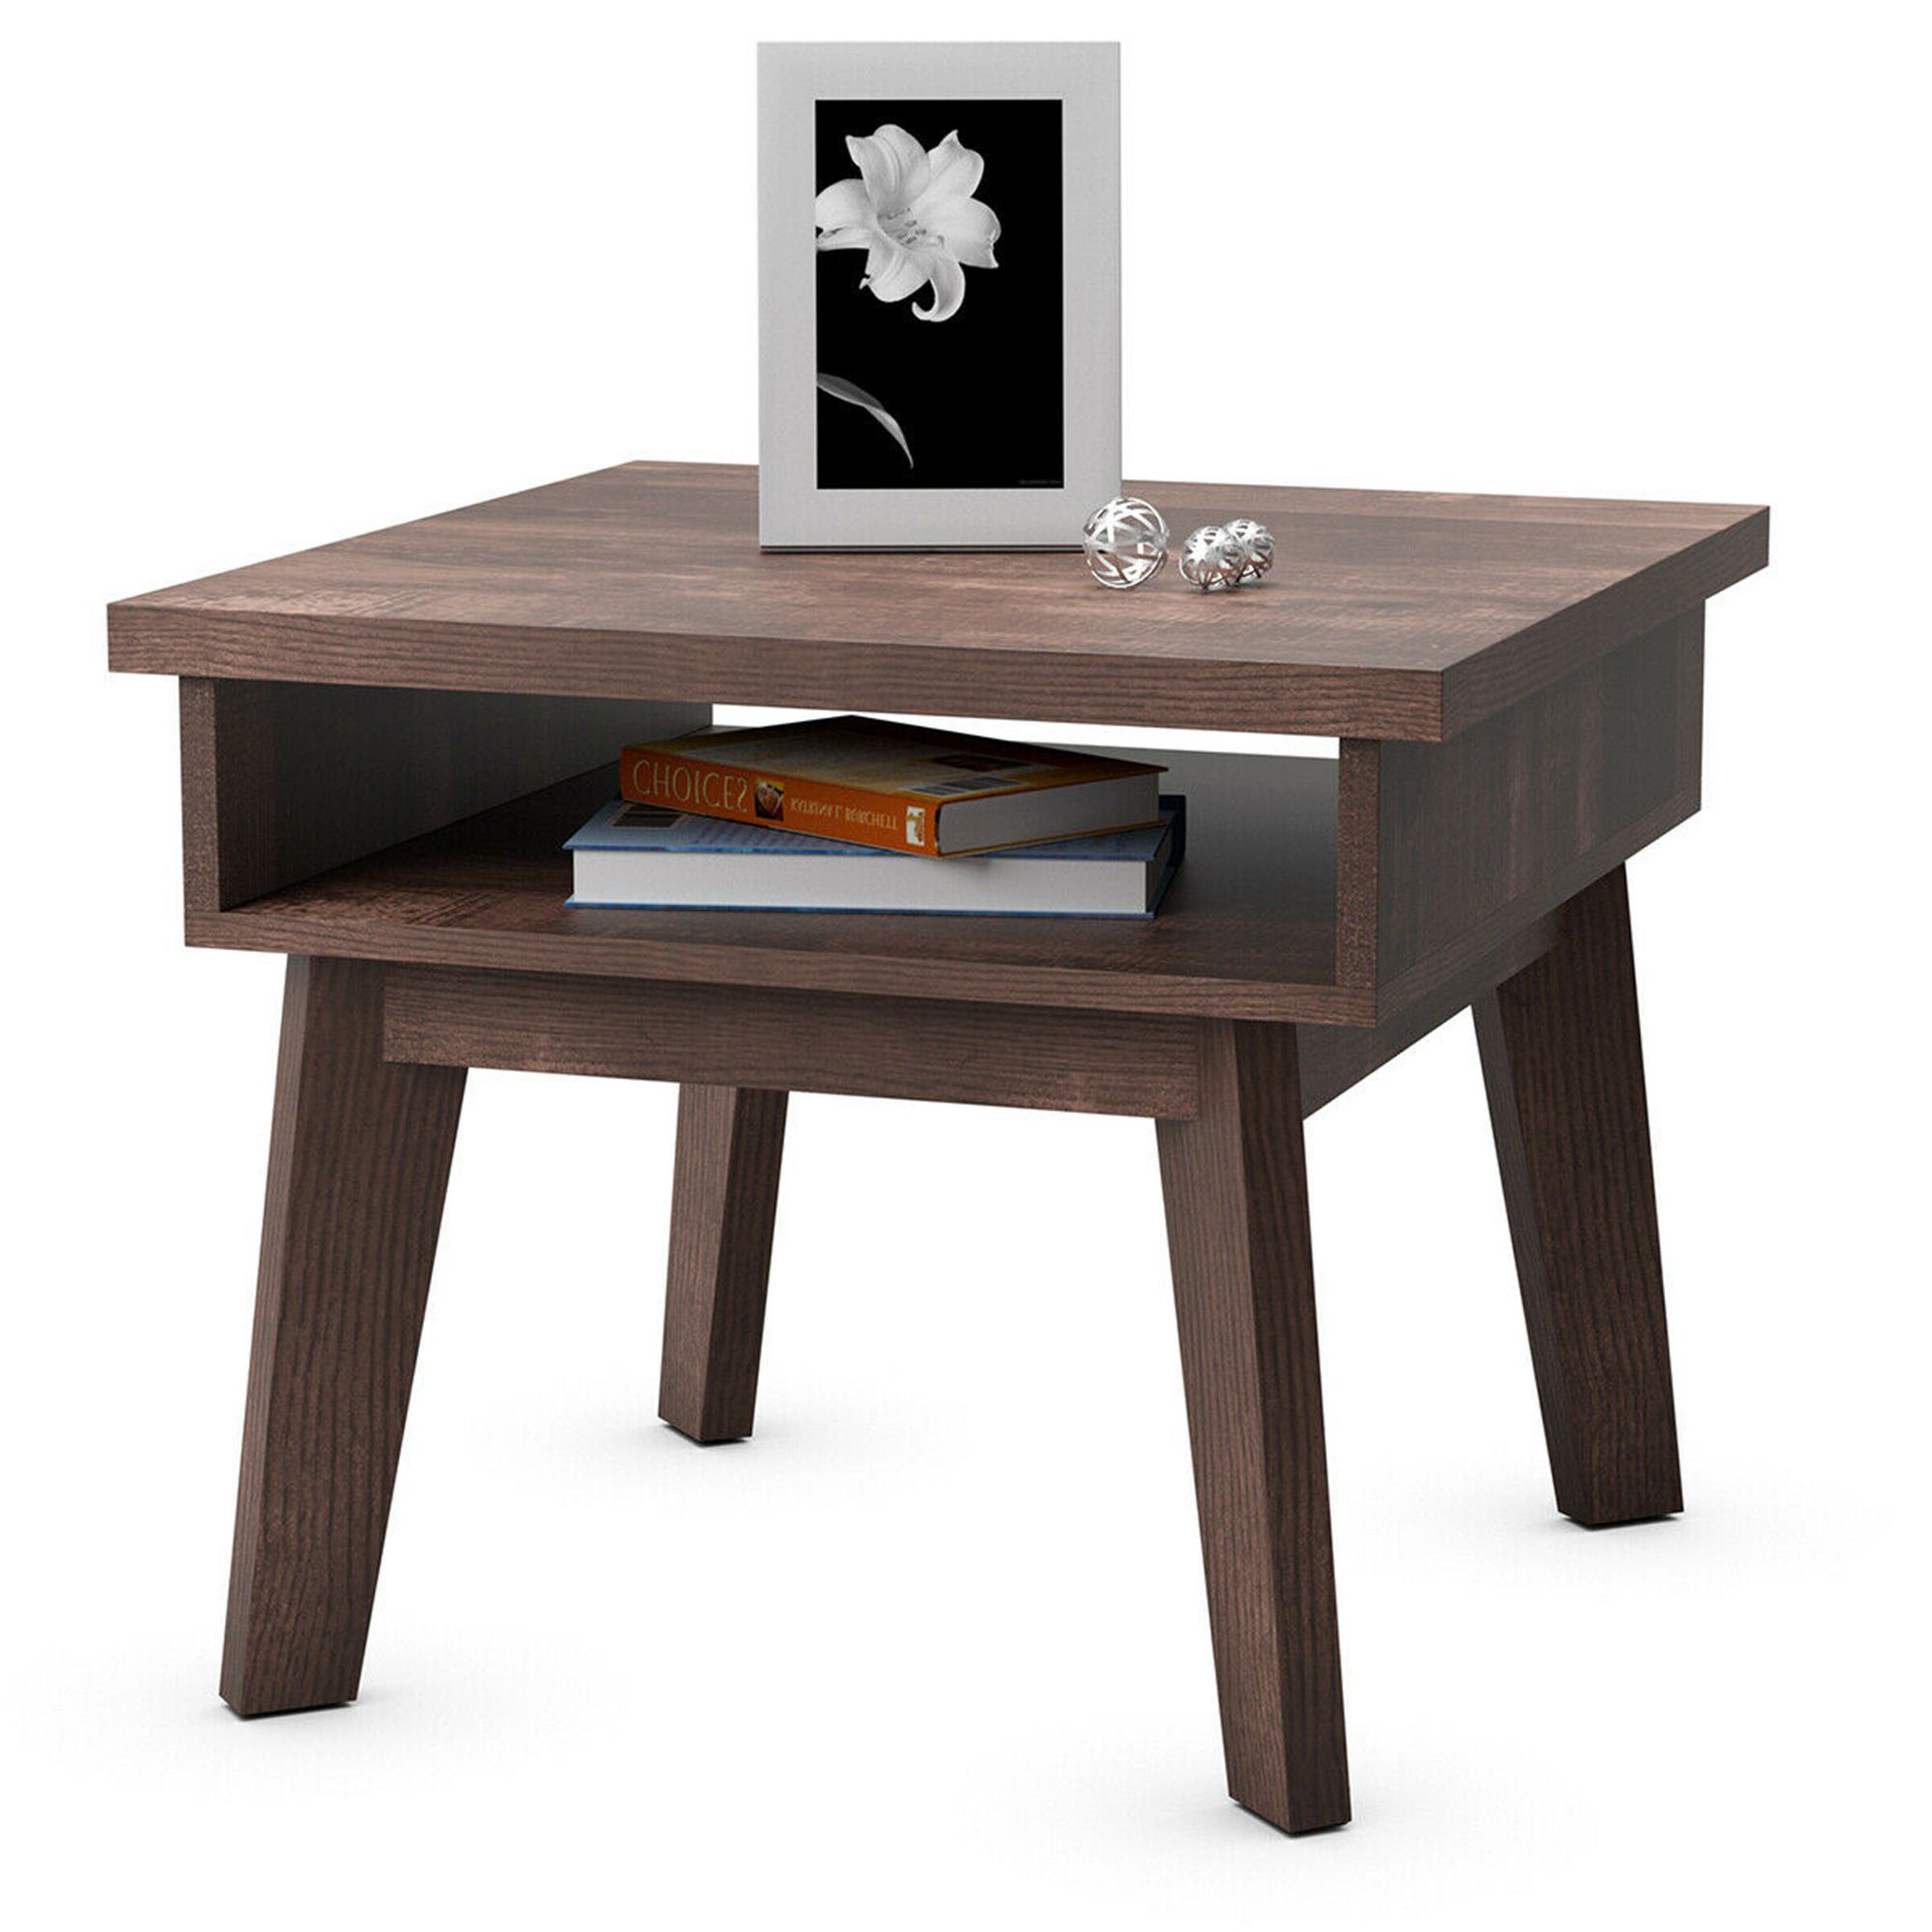 Gymax 2 Tier Nightstand Space Saving Side Sofa End Table W Inside Famous Open Storage Coffee Tables (Gallery 6 of 20)